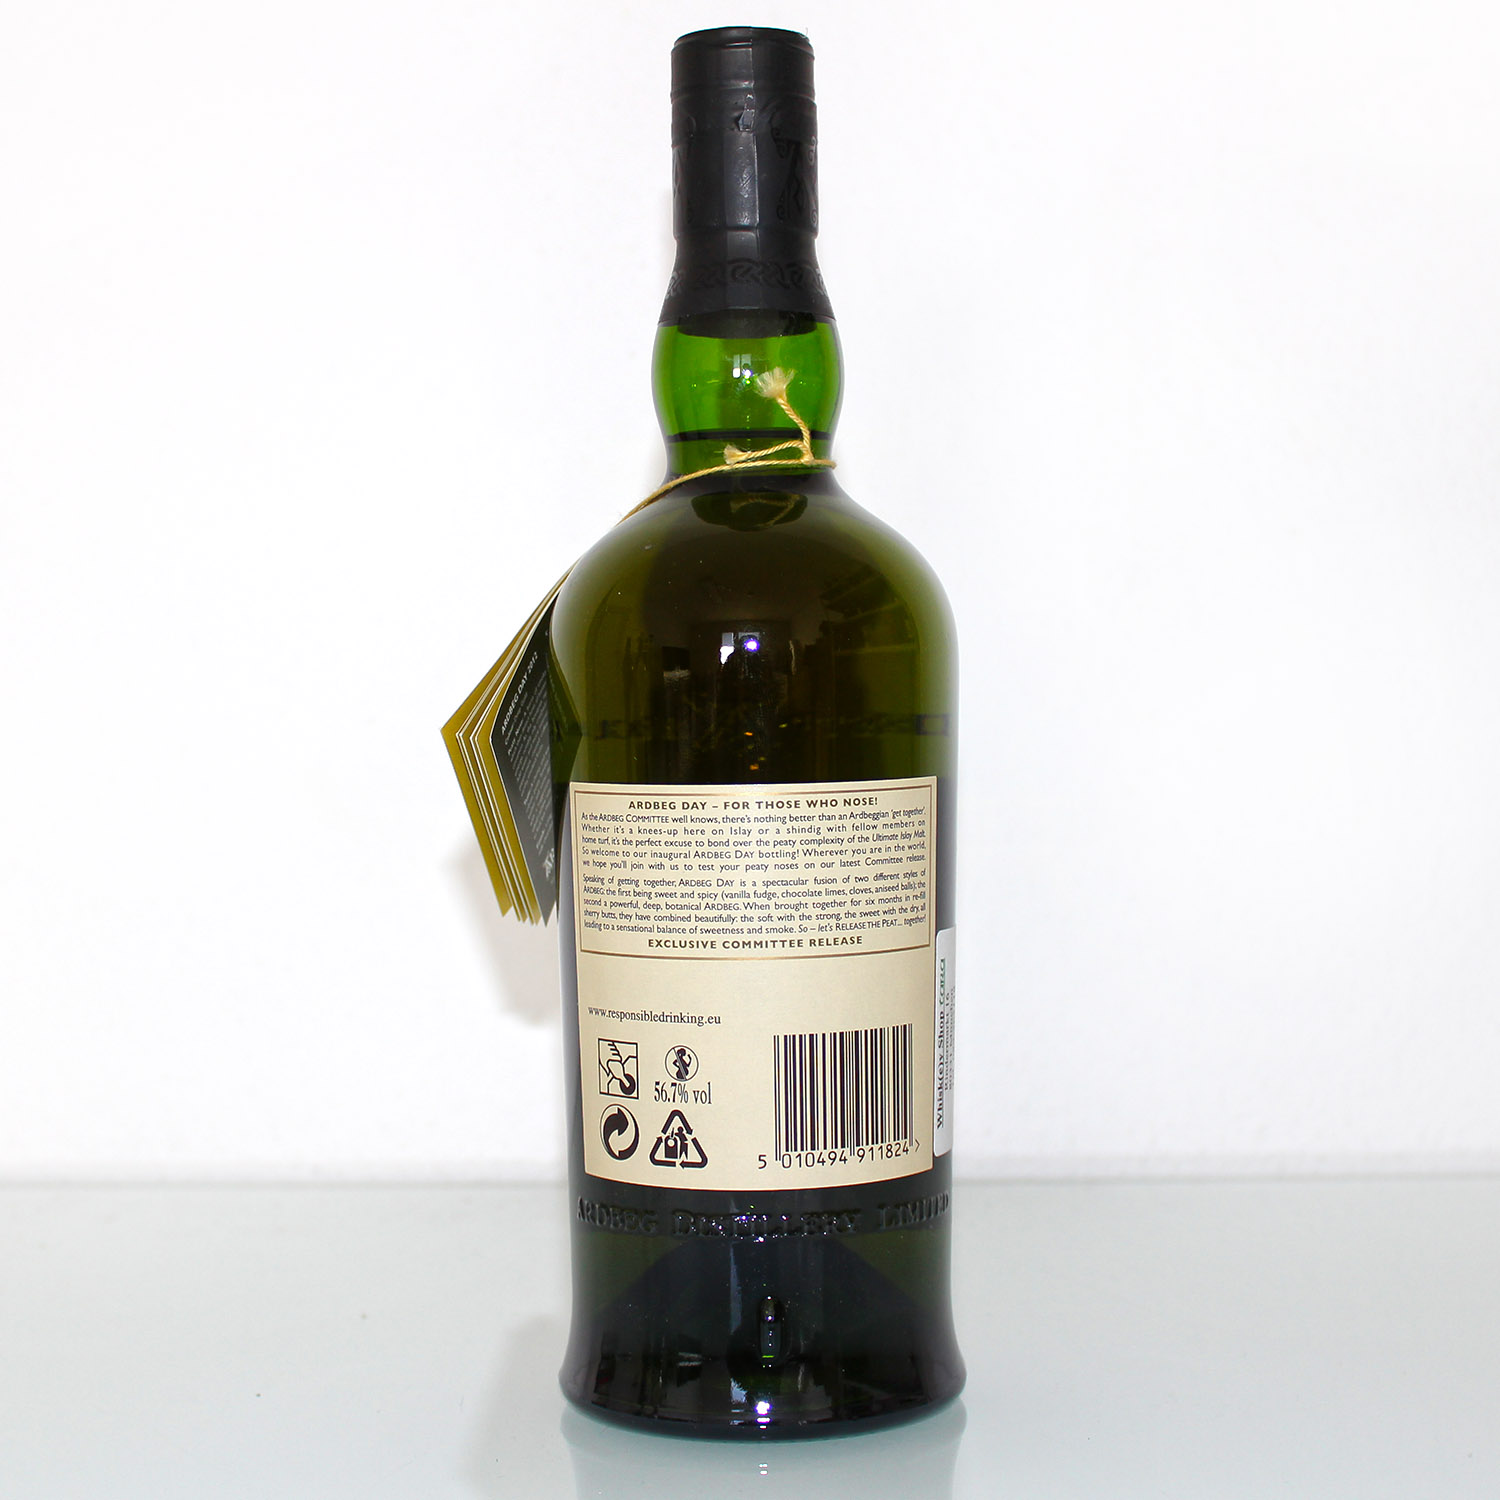 Ardbeg Day Committee Release 2012 Back